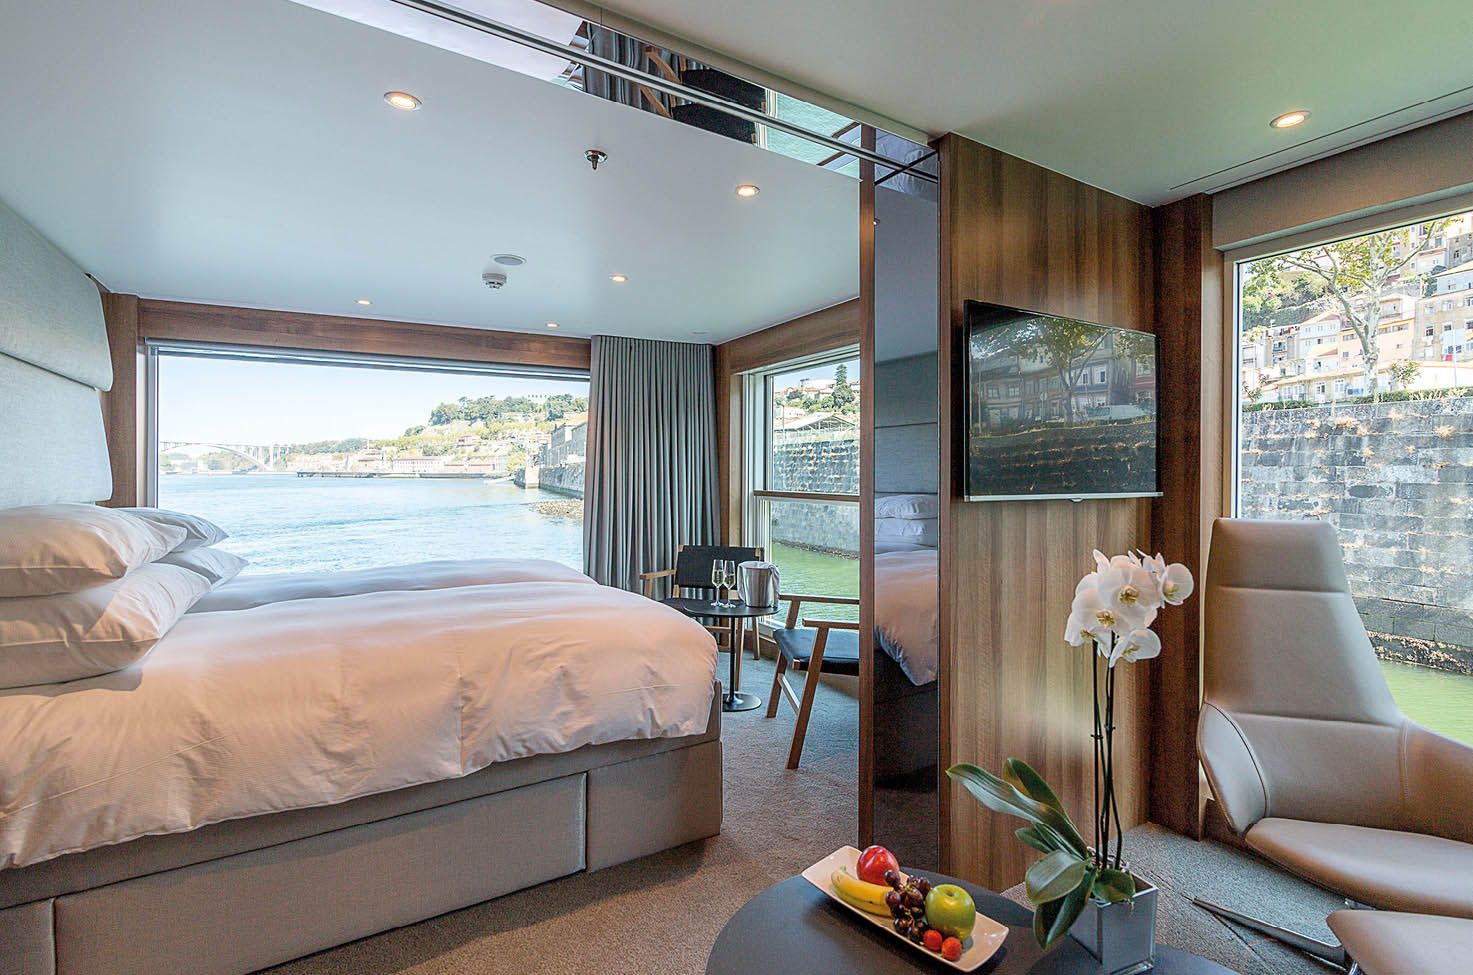 The Riverview Suite is found exclusively on the Emerald Radiance Star-Ship. A spacious suite is shown with a plush double bed, comfortable chair and large balcony-style window.